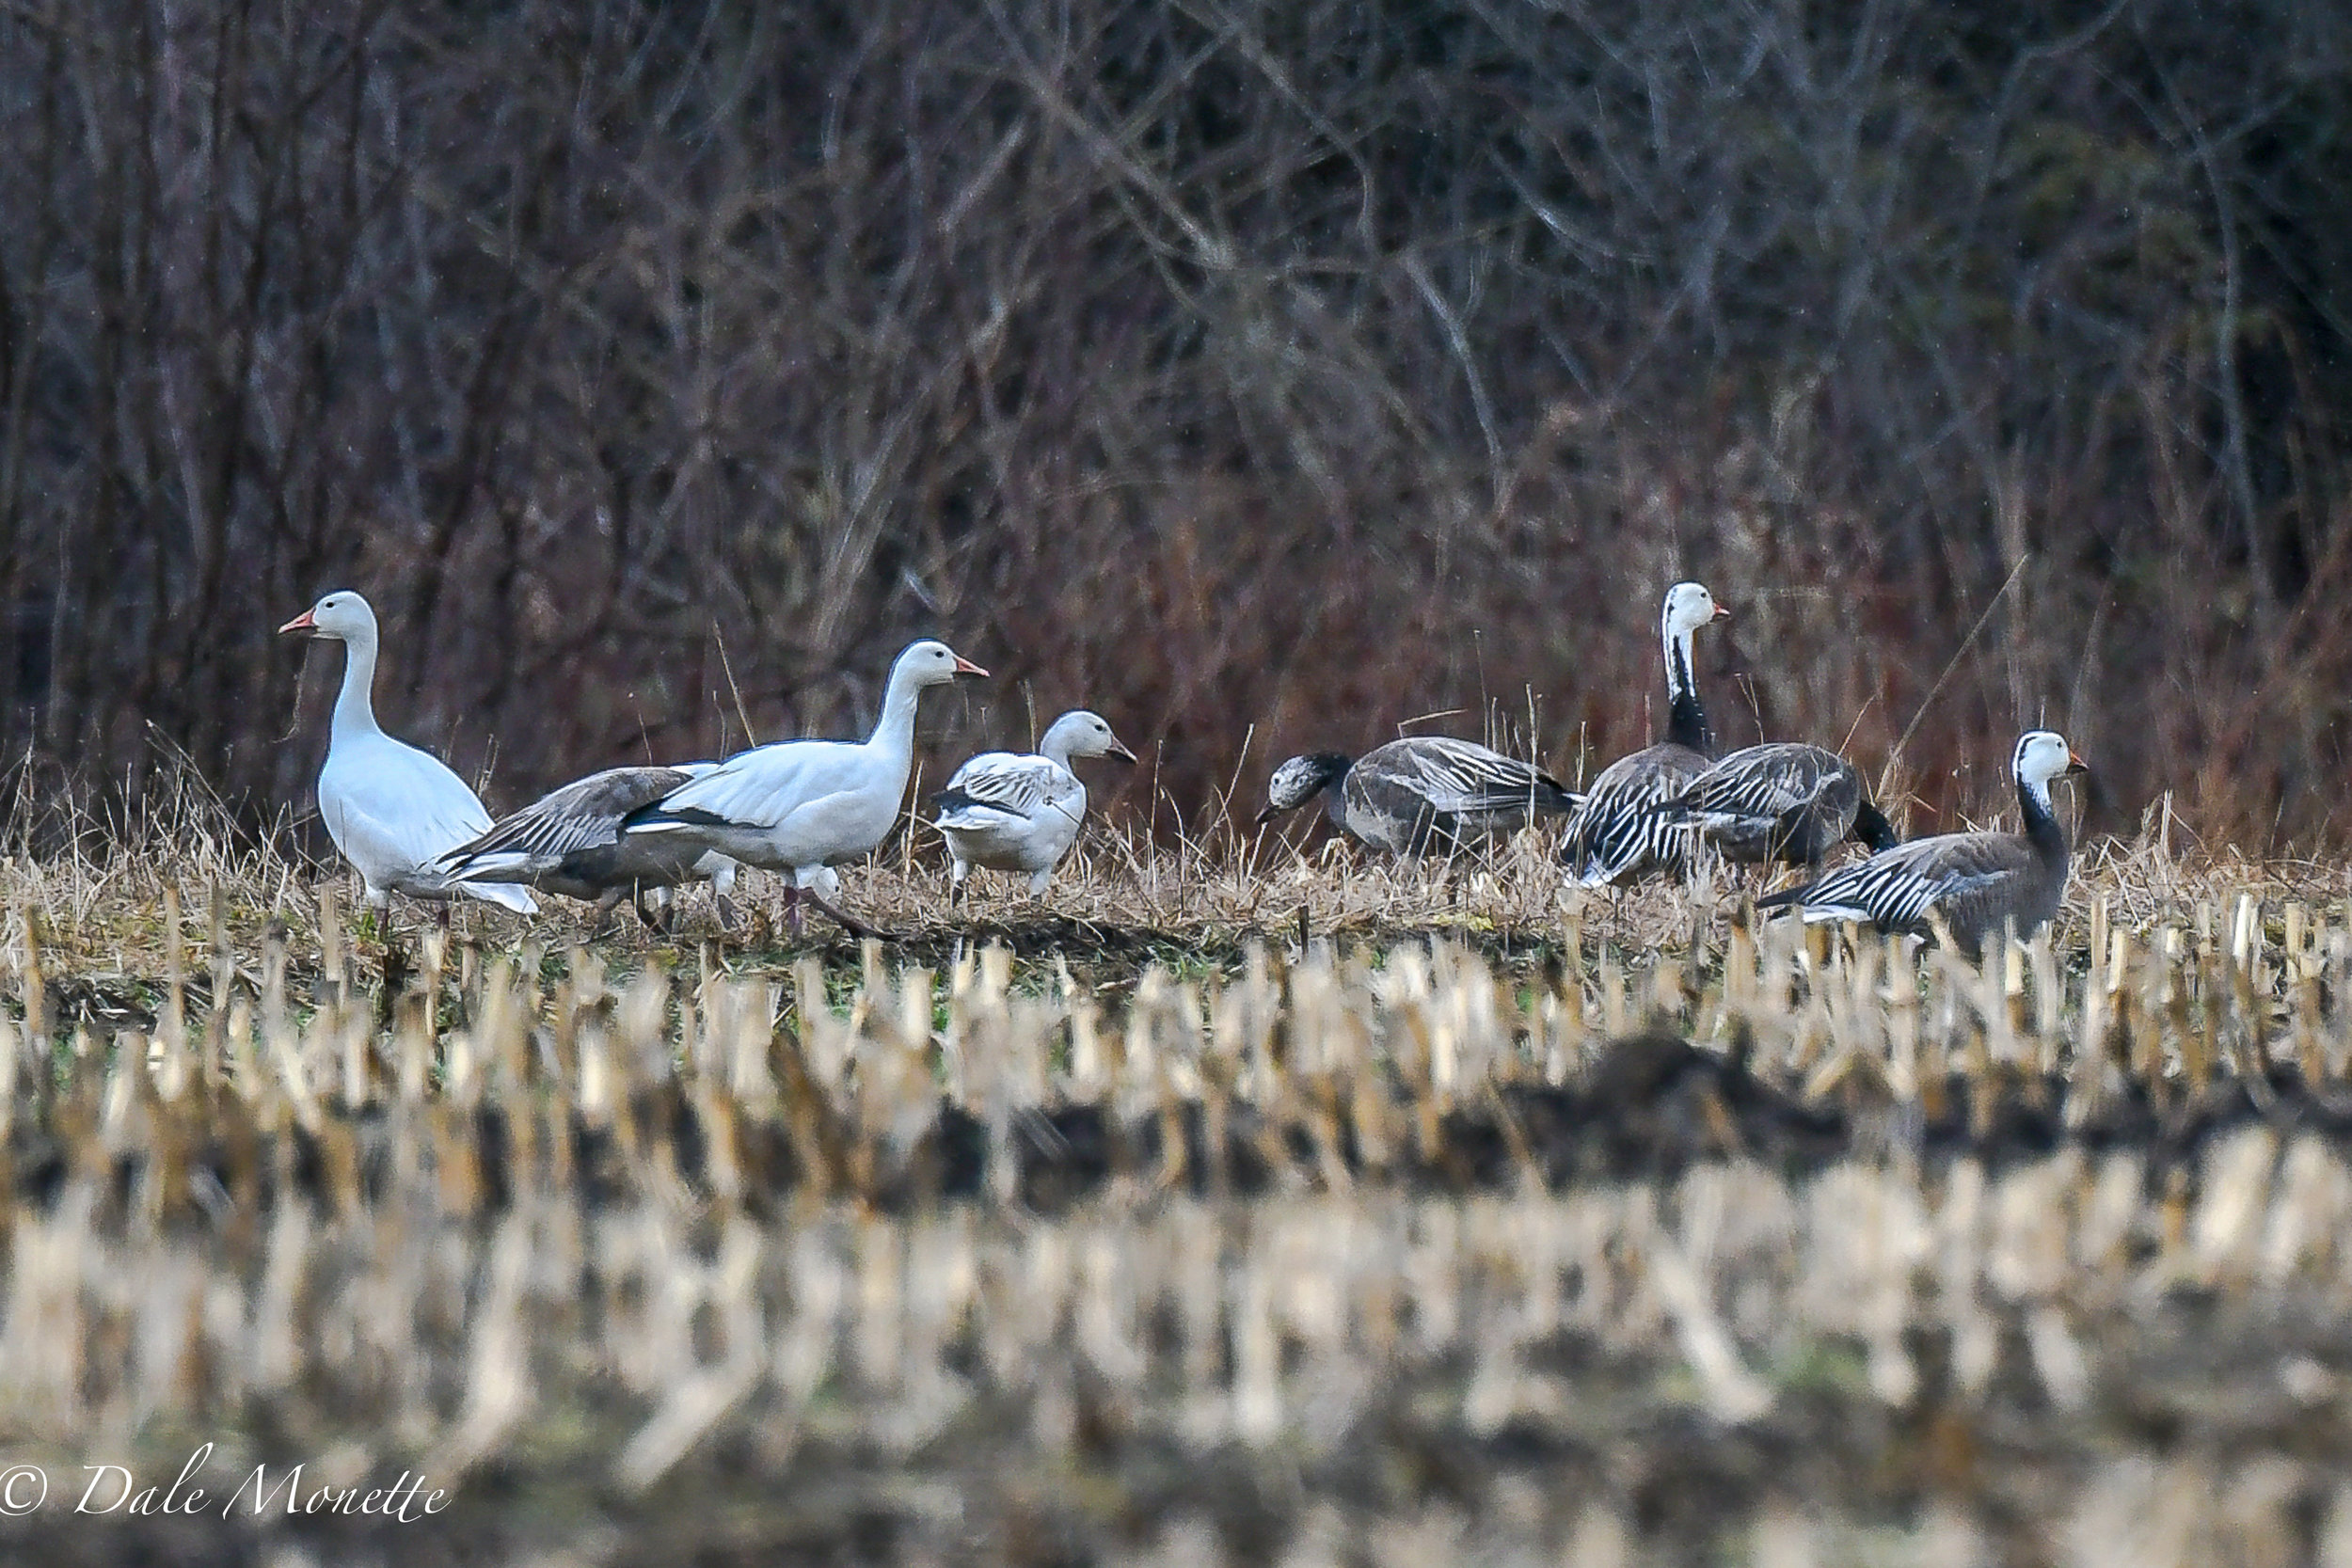   A good find this afternoon in a large pasture in New Salem.&nbsp; About 45 snow geese (the white ones) along with a rare blue phase of the snow geese.  